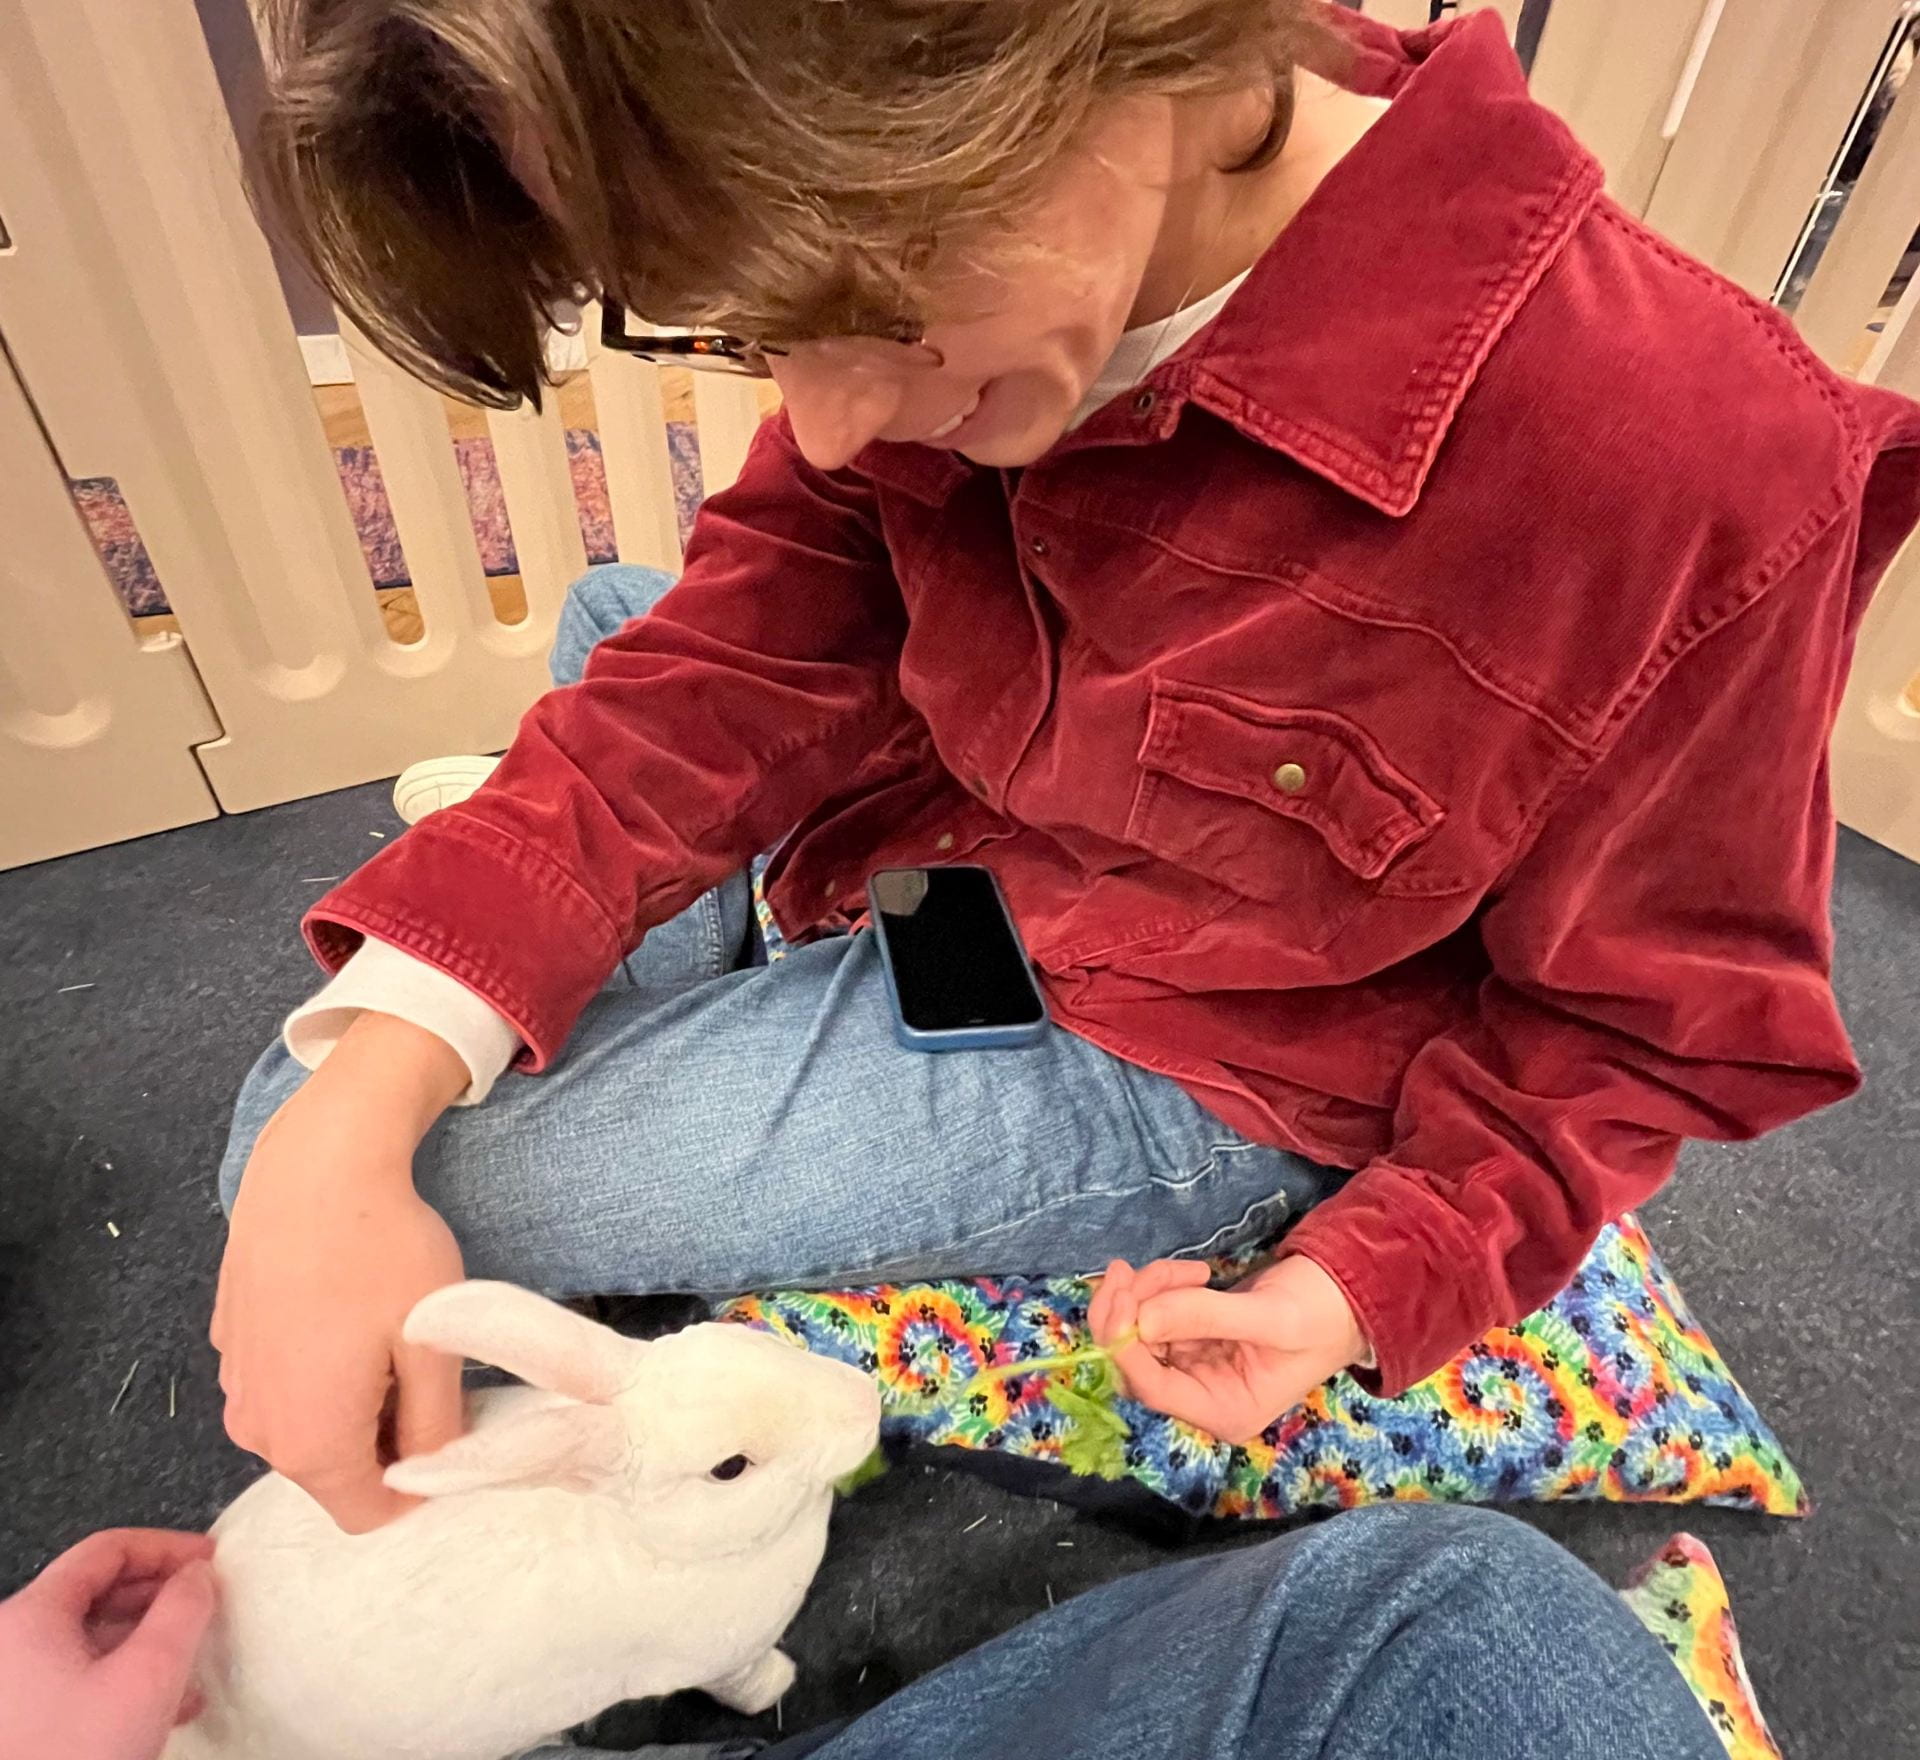 DePaul University student Jeff feeds a bunny at a local bunny cafe in Chicago.